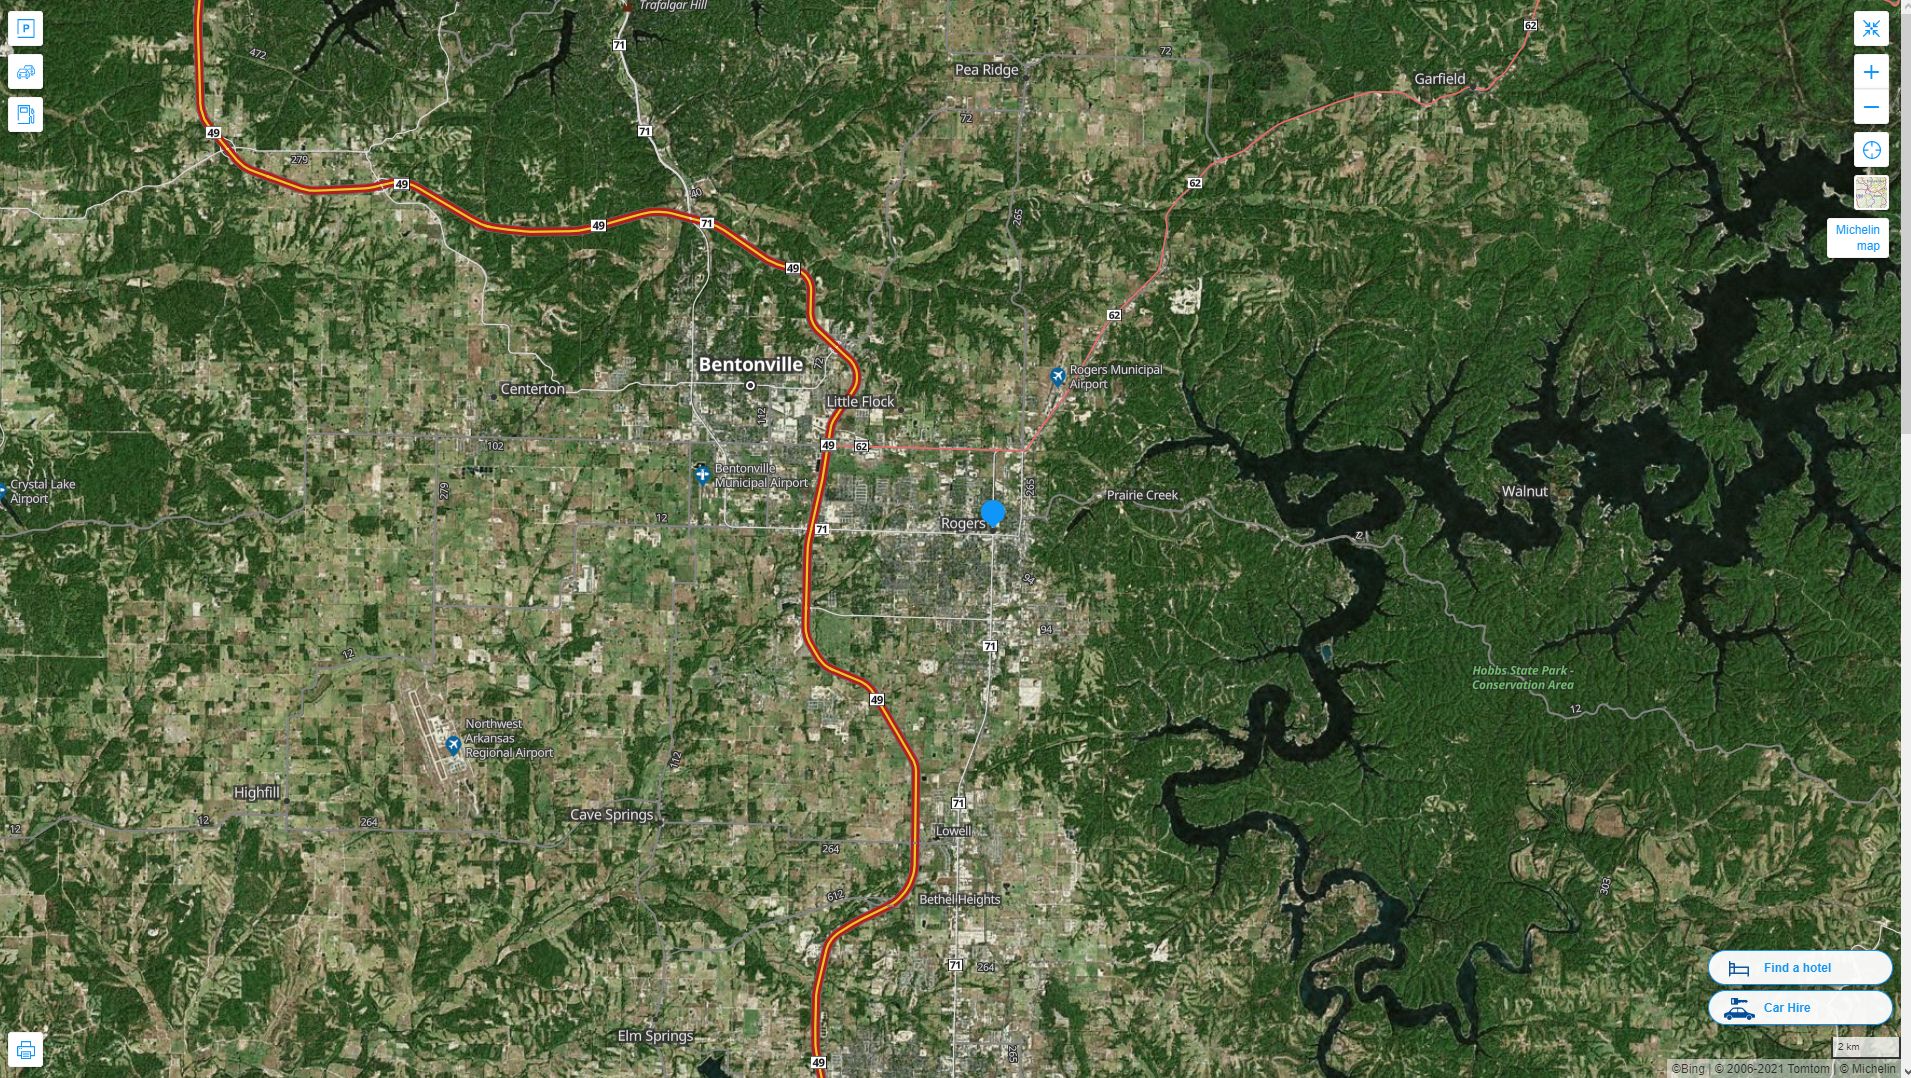 Rogers Arkansas Highway and Road Map with Satellite View